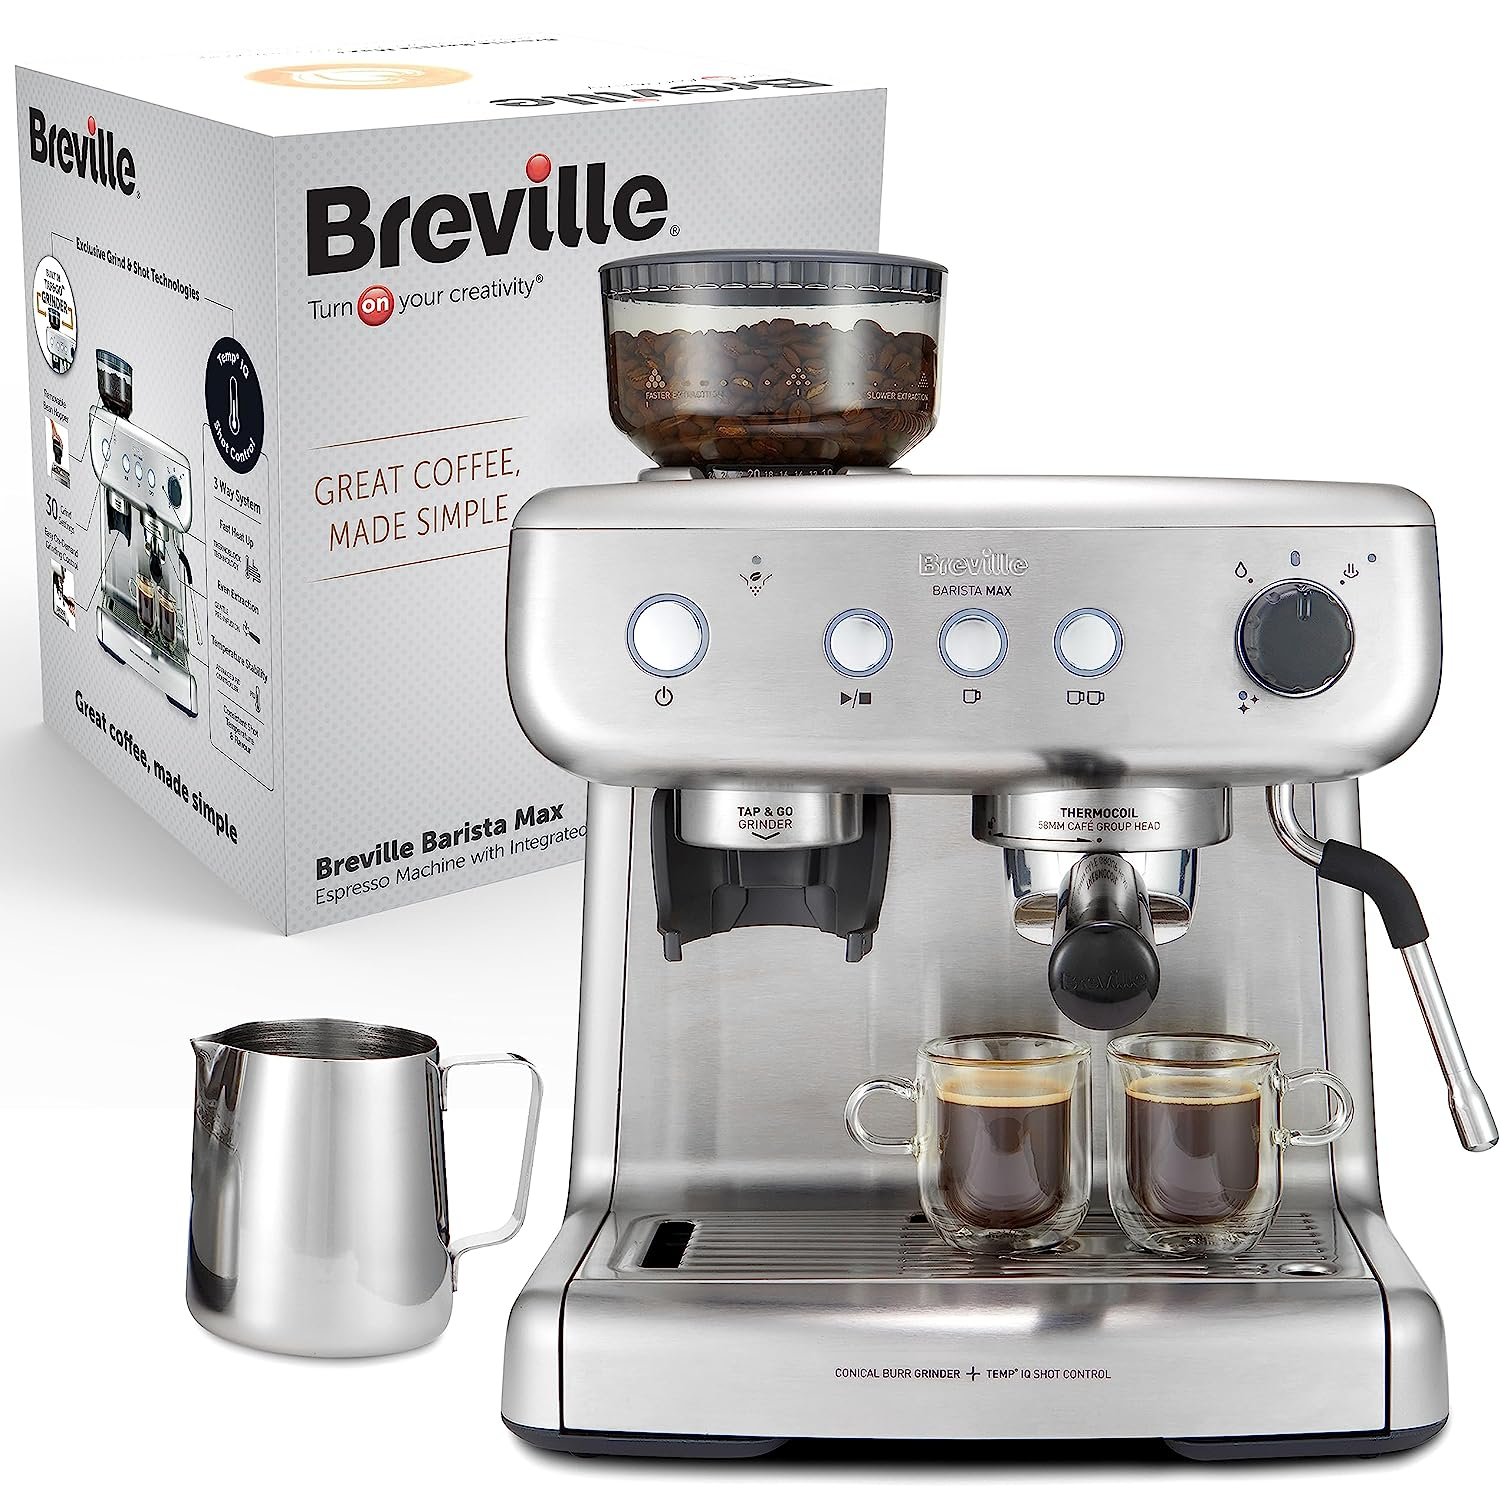 BREVILLE VCF126 Barista Max Coffee Machine – Stainless Steel